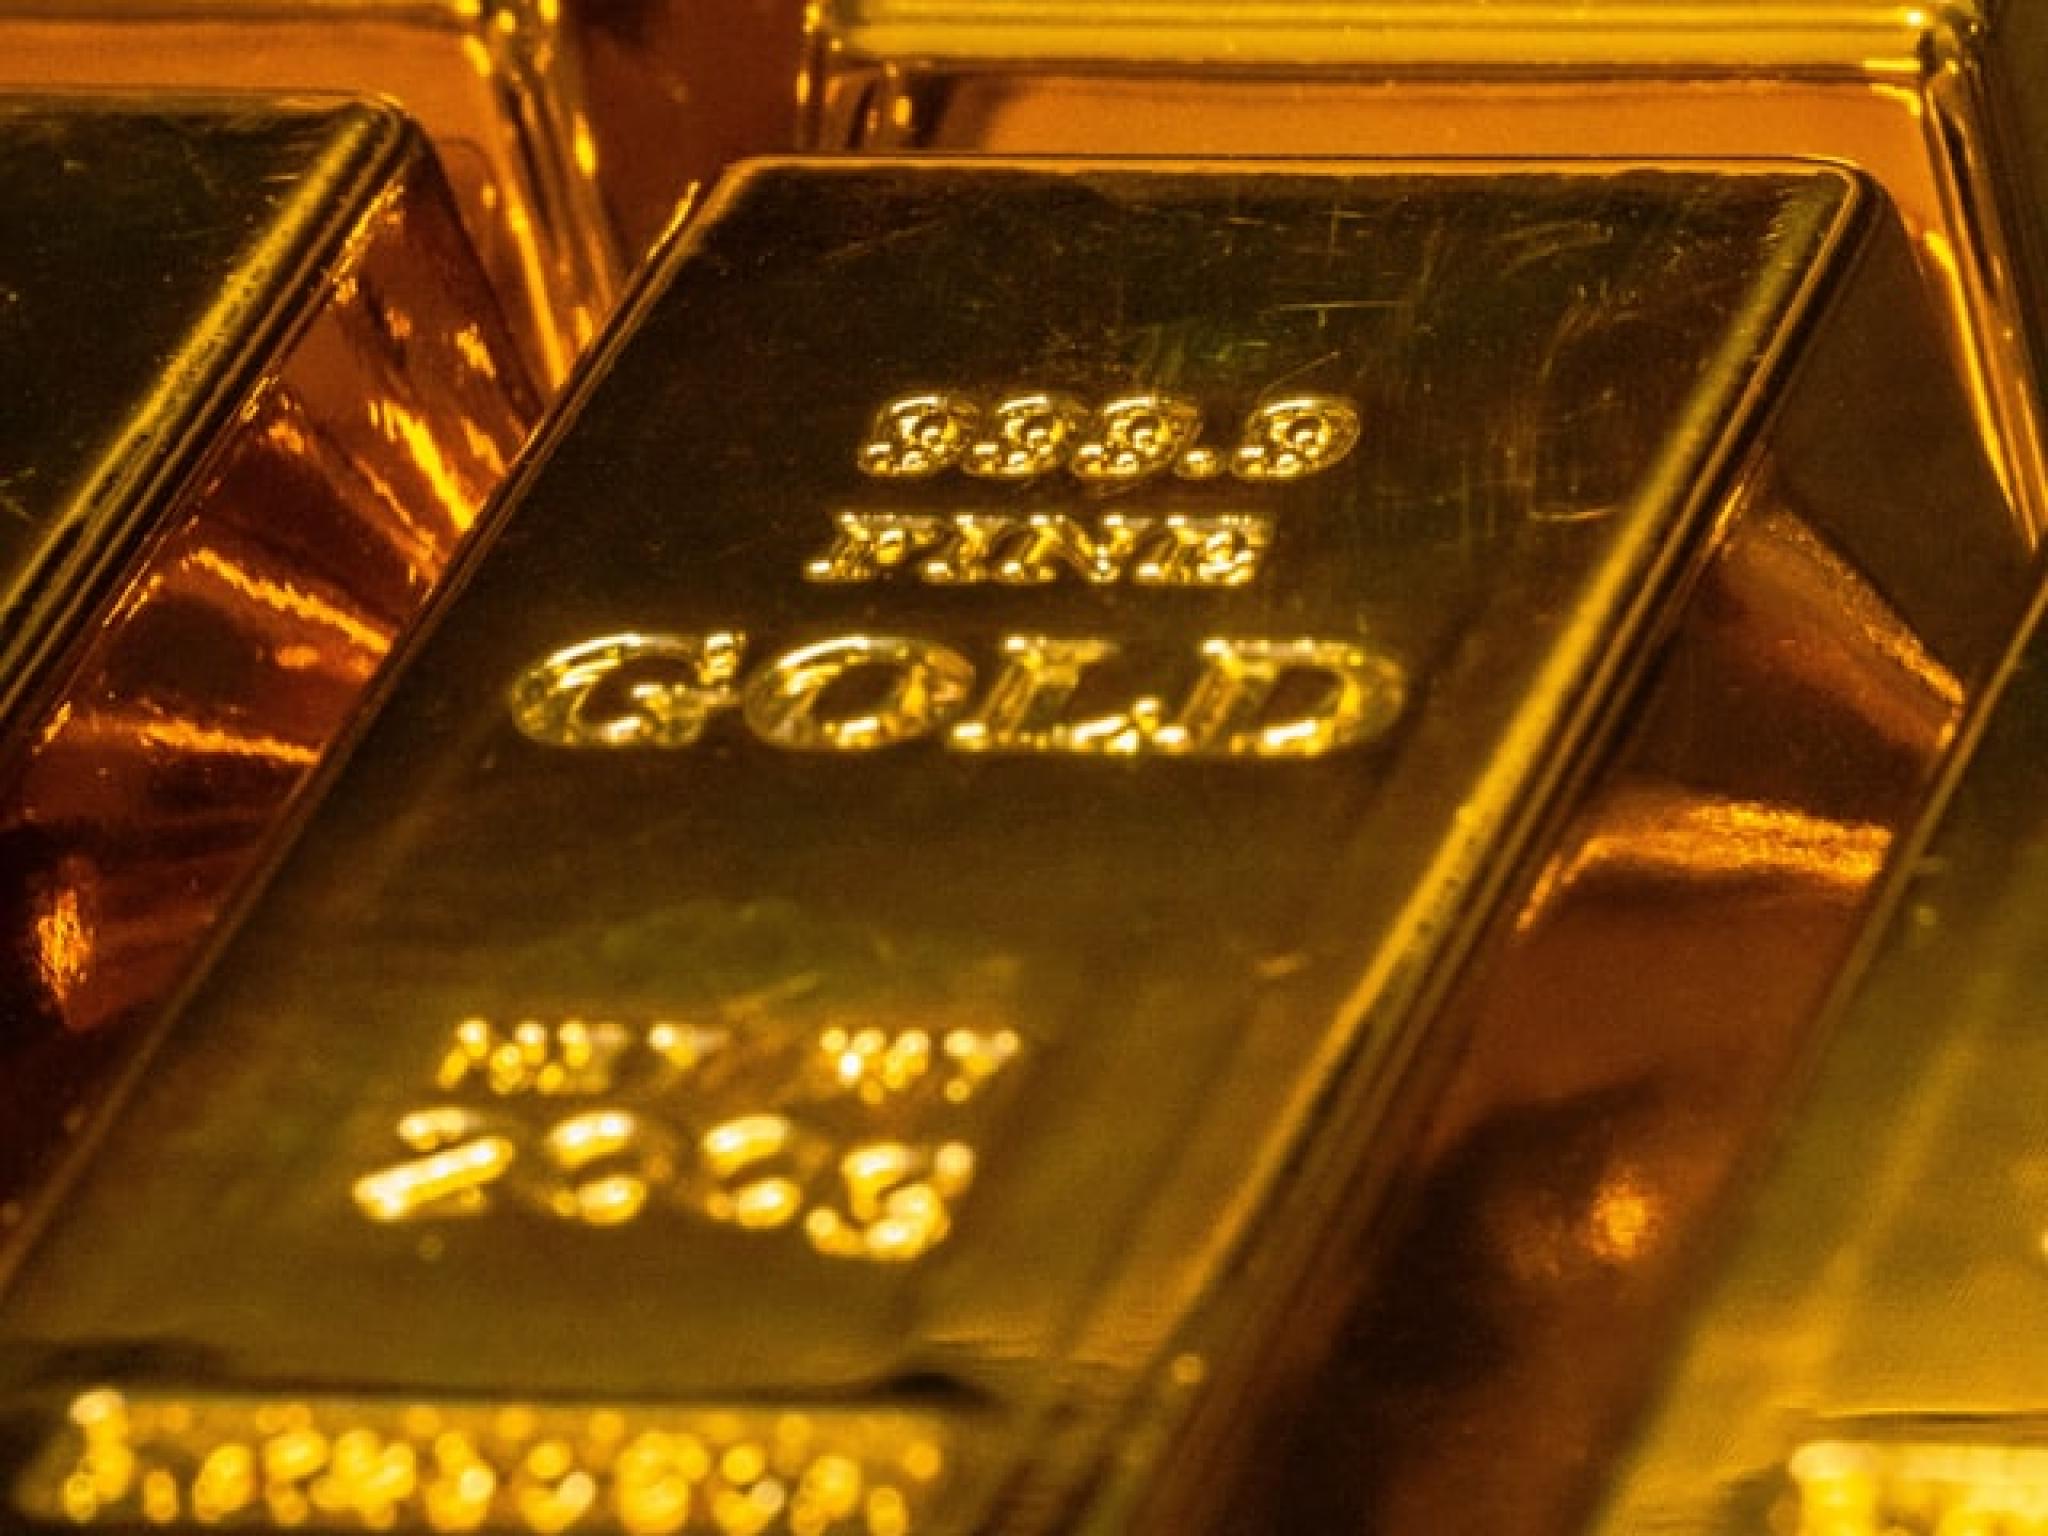  gold-over-bitcoin-3-bullish-gold-stocks-going-into-the-week 